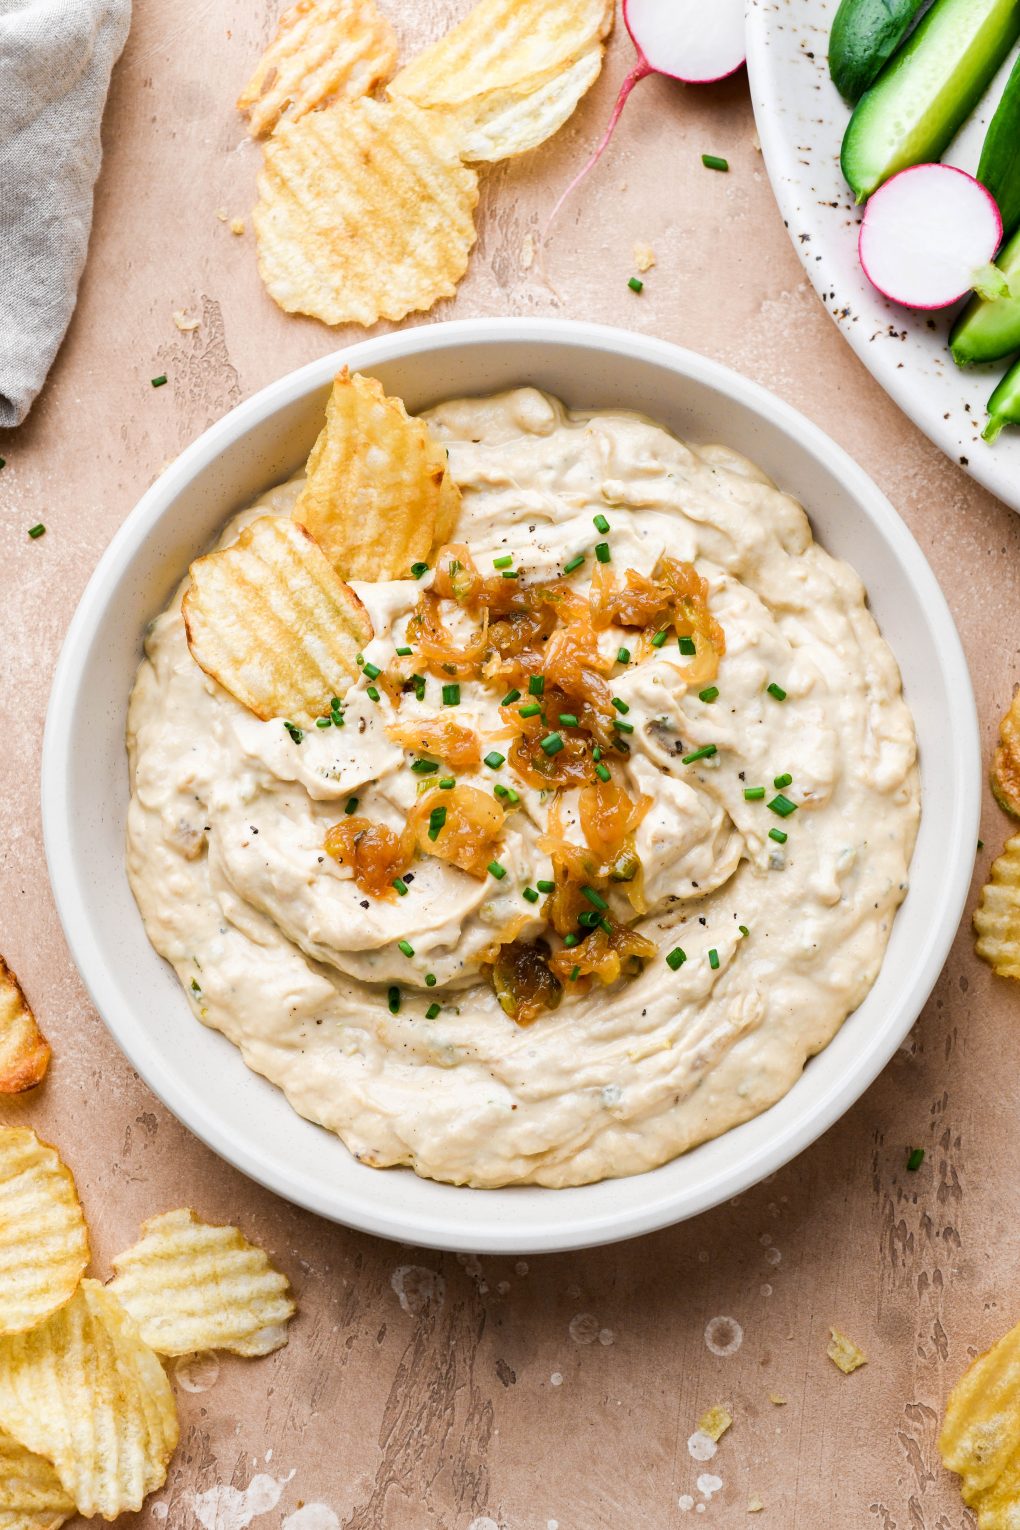 Close up overhead shot of a shallow cream colored bowl filled with super thick and creamy dairy free french onion dip. Dip is topped with caramelized onions and chives. On a light brown background surrounded by scattered ruffle potato chips and a plate of cut veggies.